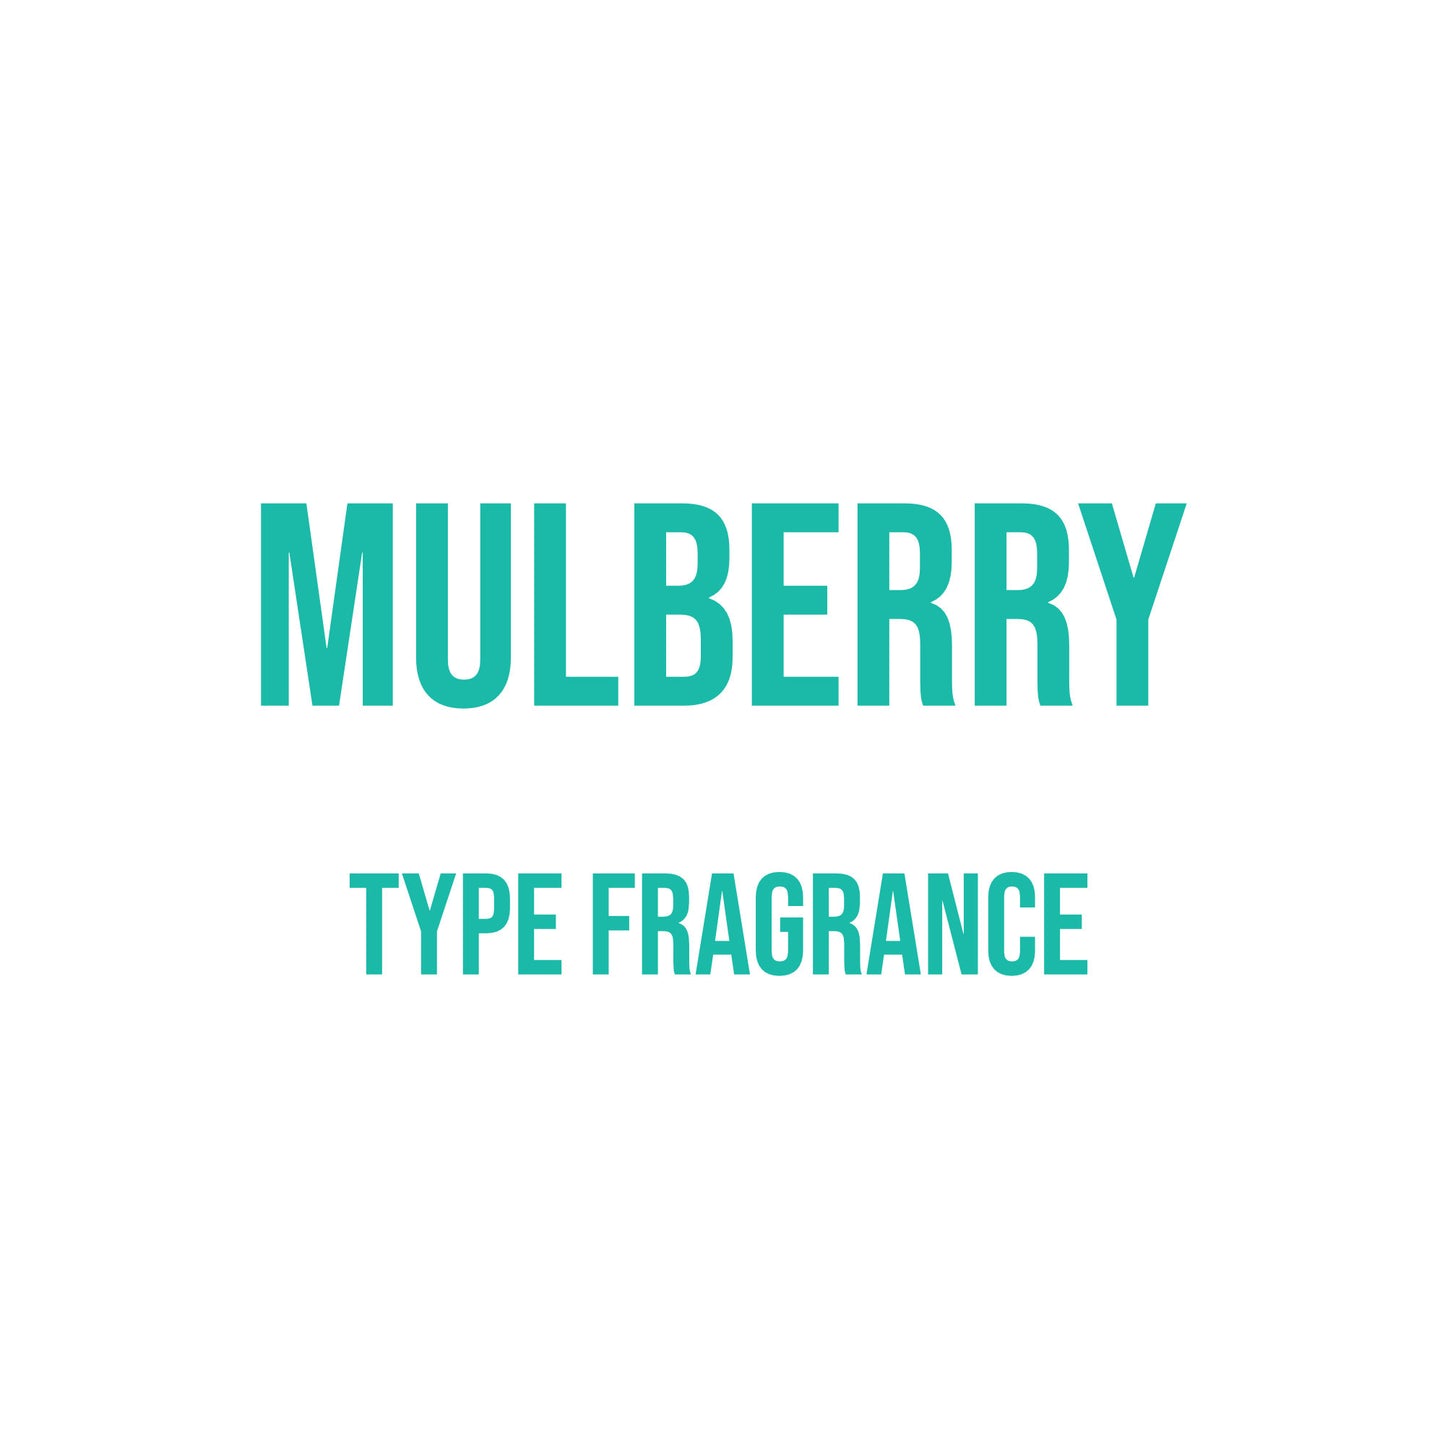 Mulberry Type Fragrance